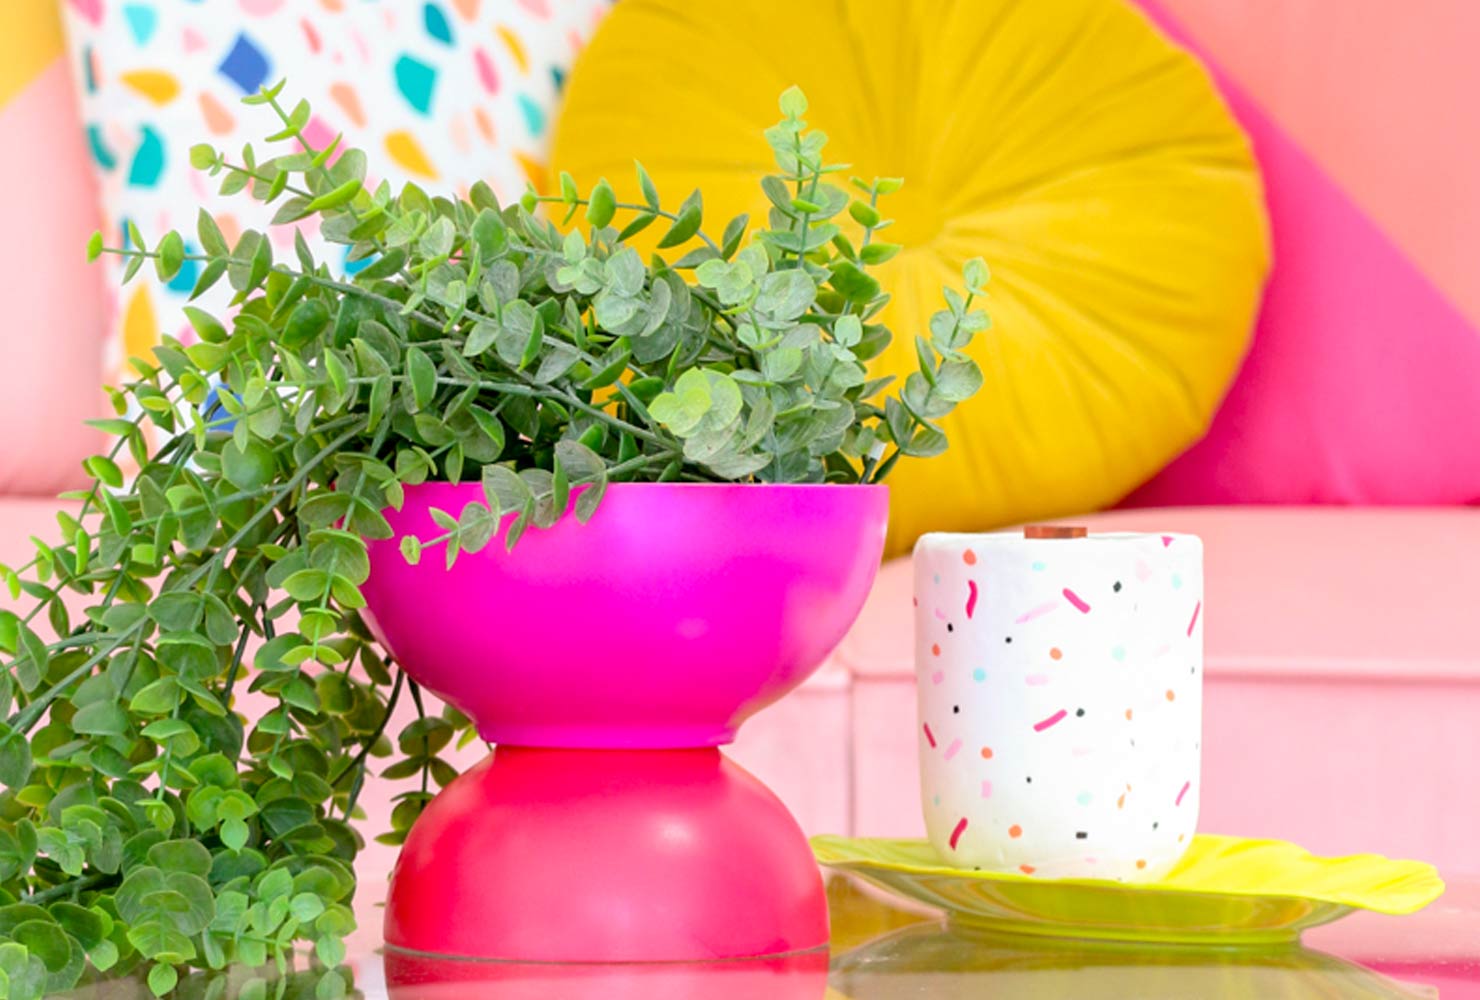 Pink planter with green plant.